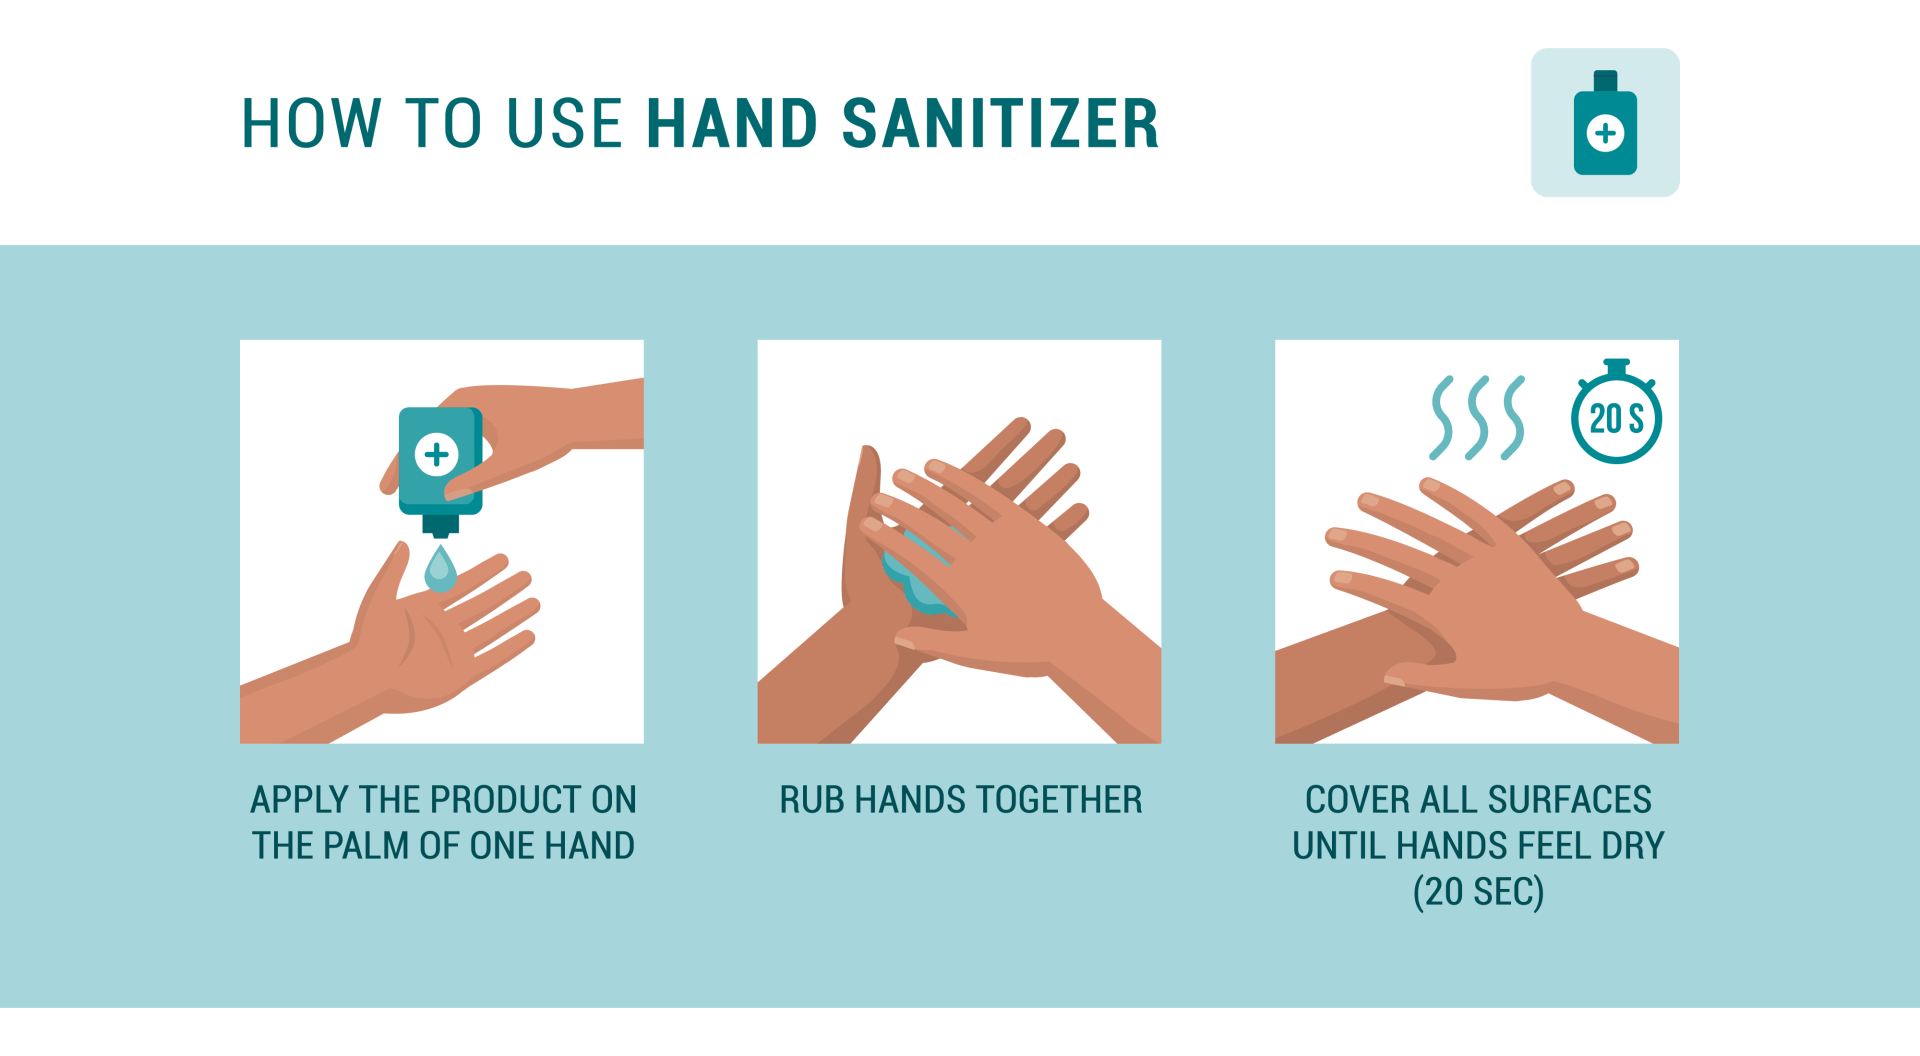 A graphic showing how to use hand sanitizer.